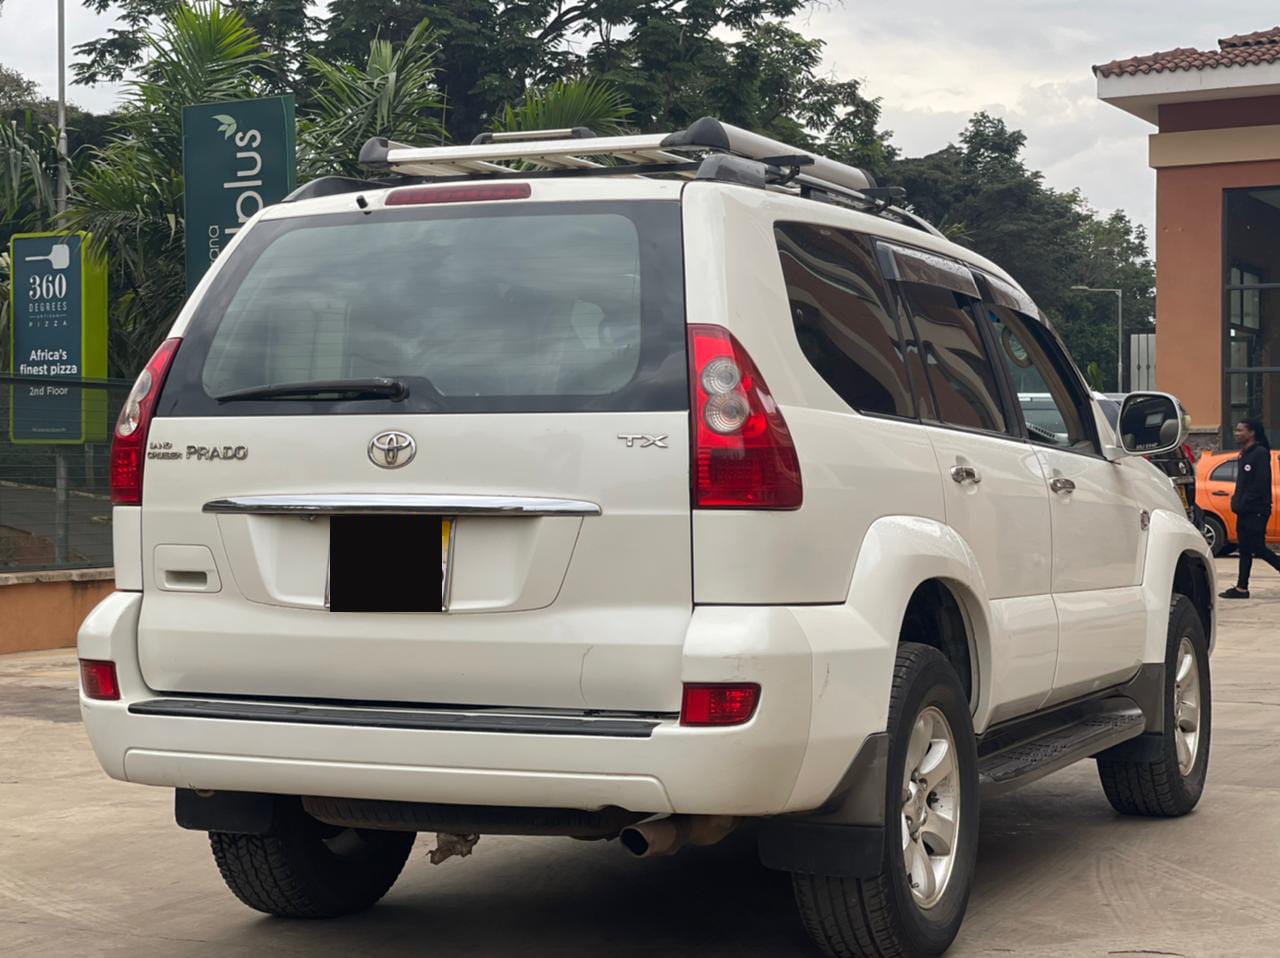 Toyota Prado 1.5M  Sunroof 7 Leather seats -Pay 20% 80% in 60 MONTHLY INSTALLMENTS